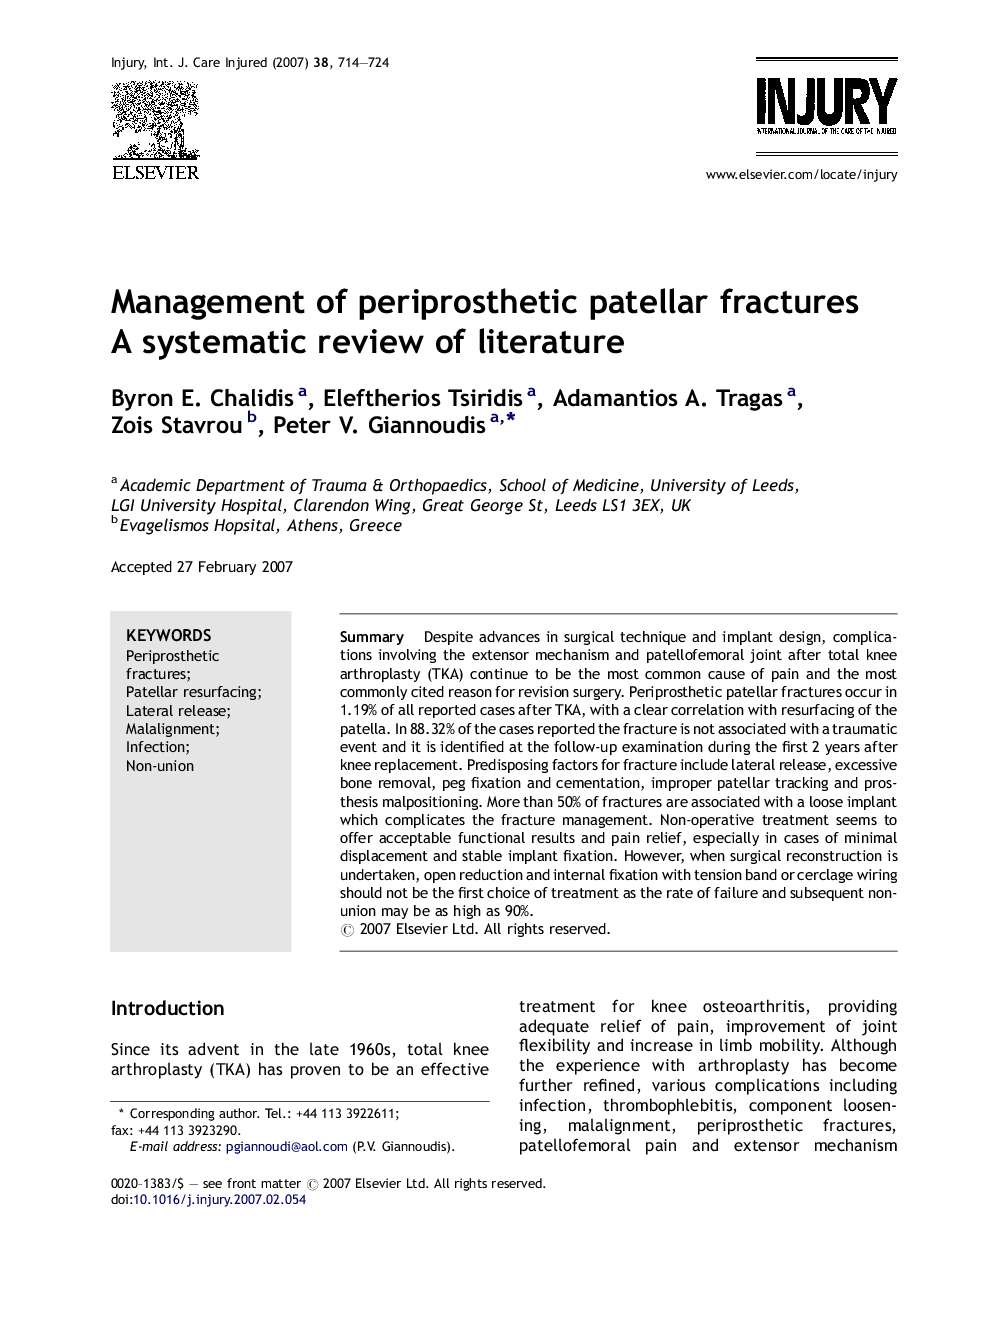 Management of periprosthetic patellar fractures: A systematic review of literature